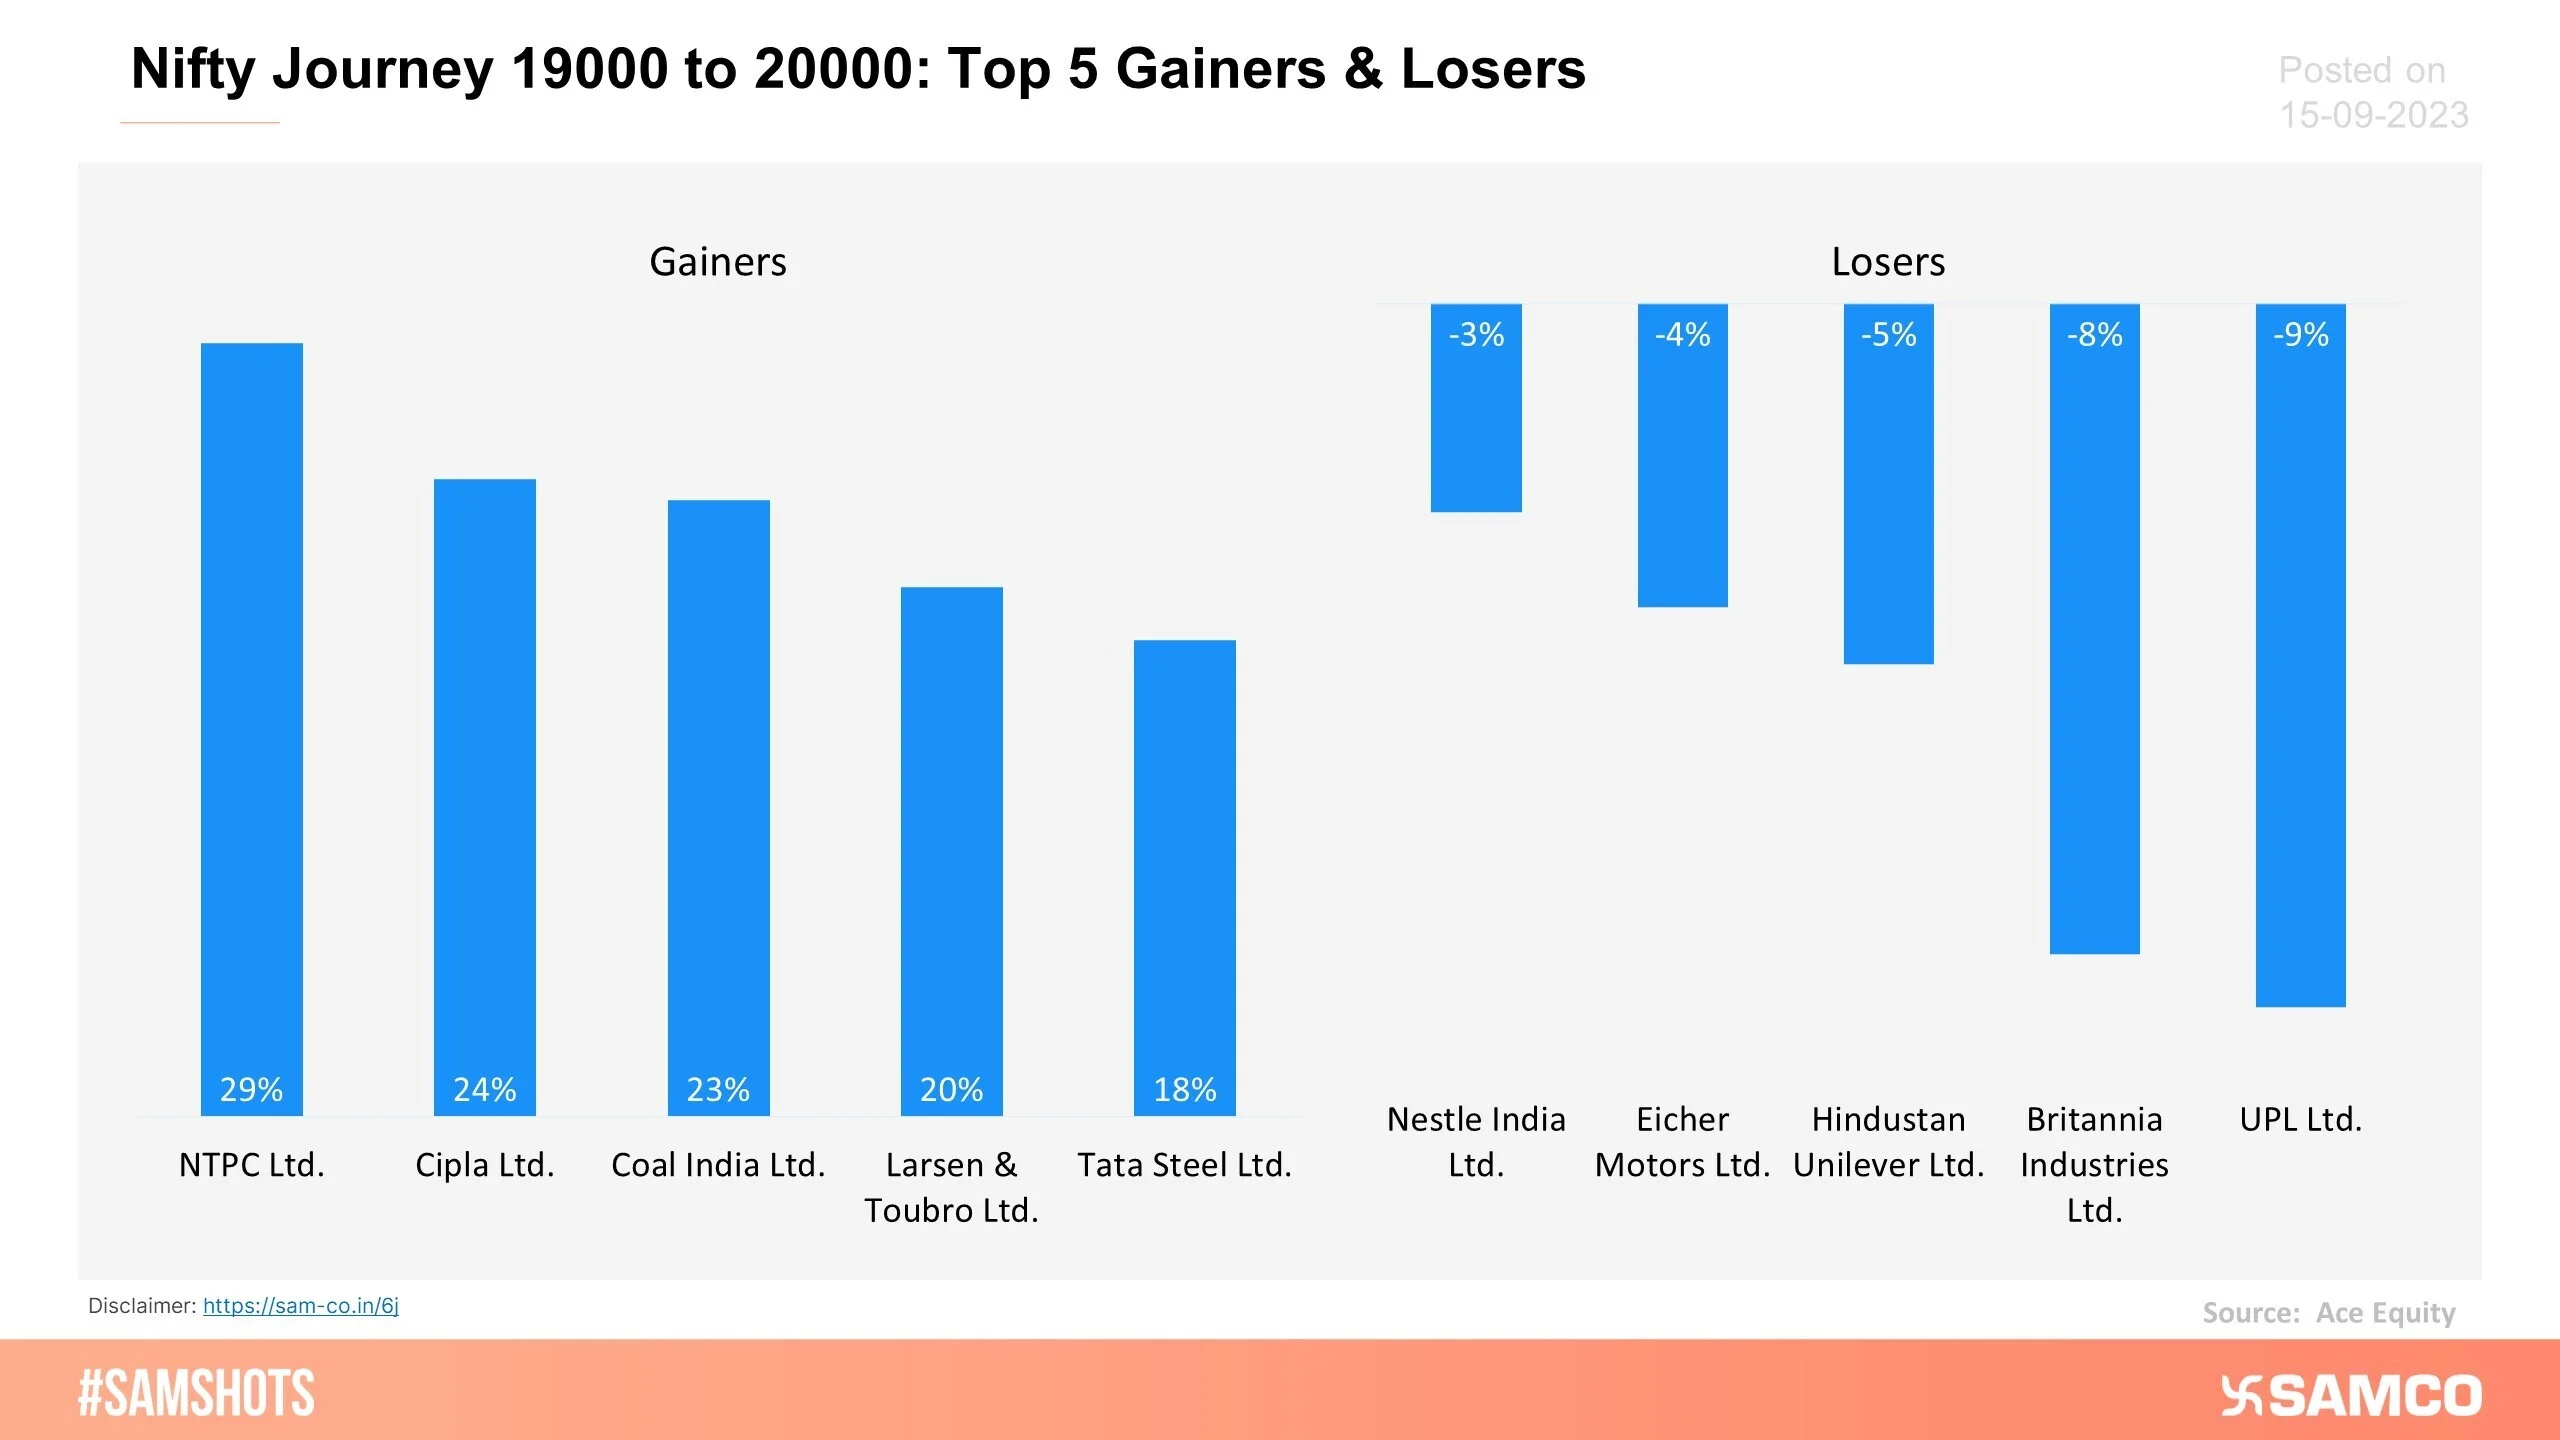 The chart below shows the Top 5 Gainers and Losers of Nifty50 between its journey of 19,000 and 20,000